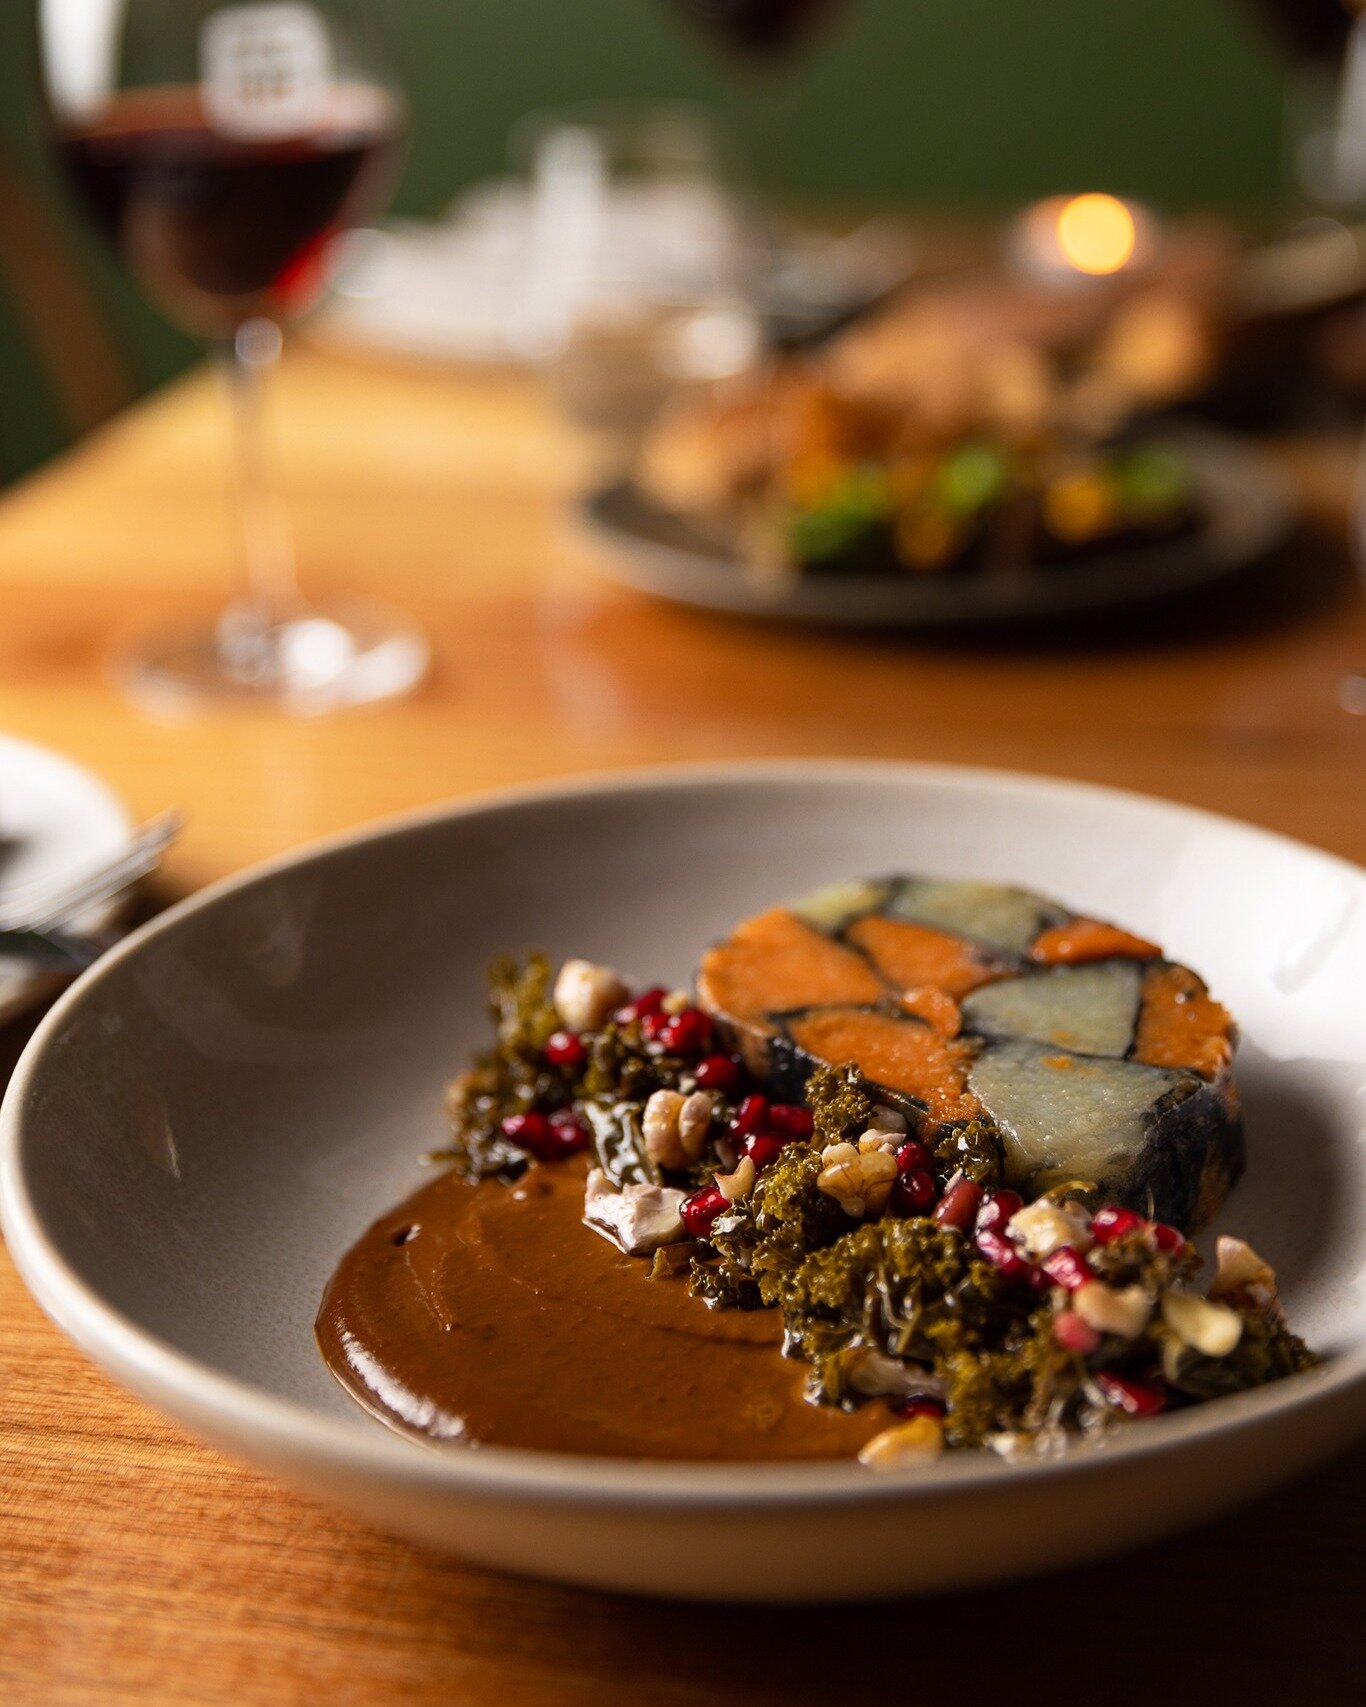 The Sweet Potato Mosaic, a fresh take on a Sergio Classic. 

Serge's latest instalment of Edible art comes in the form of sweet potato, a black walnut-chipotle sauce and a kale-pomegranate salsa 🥬

The chipotle dances delicately, warming gradually a